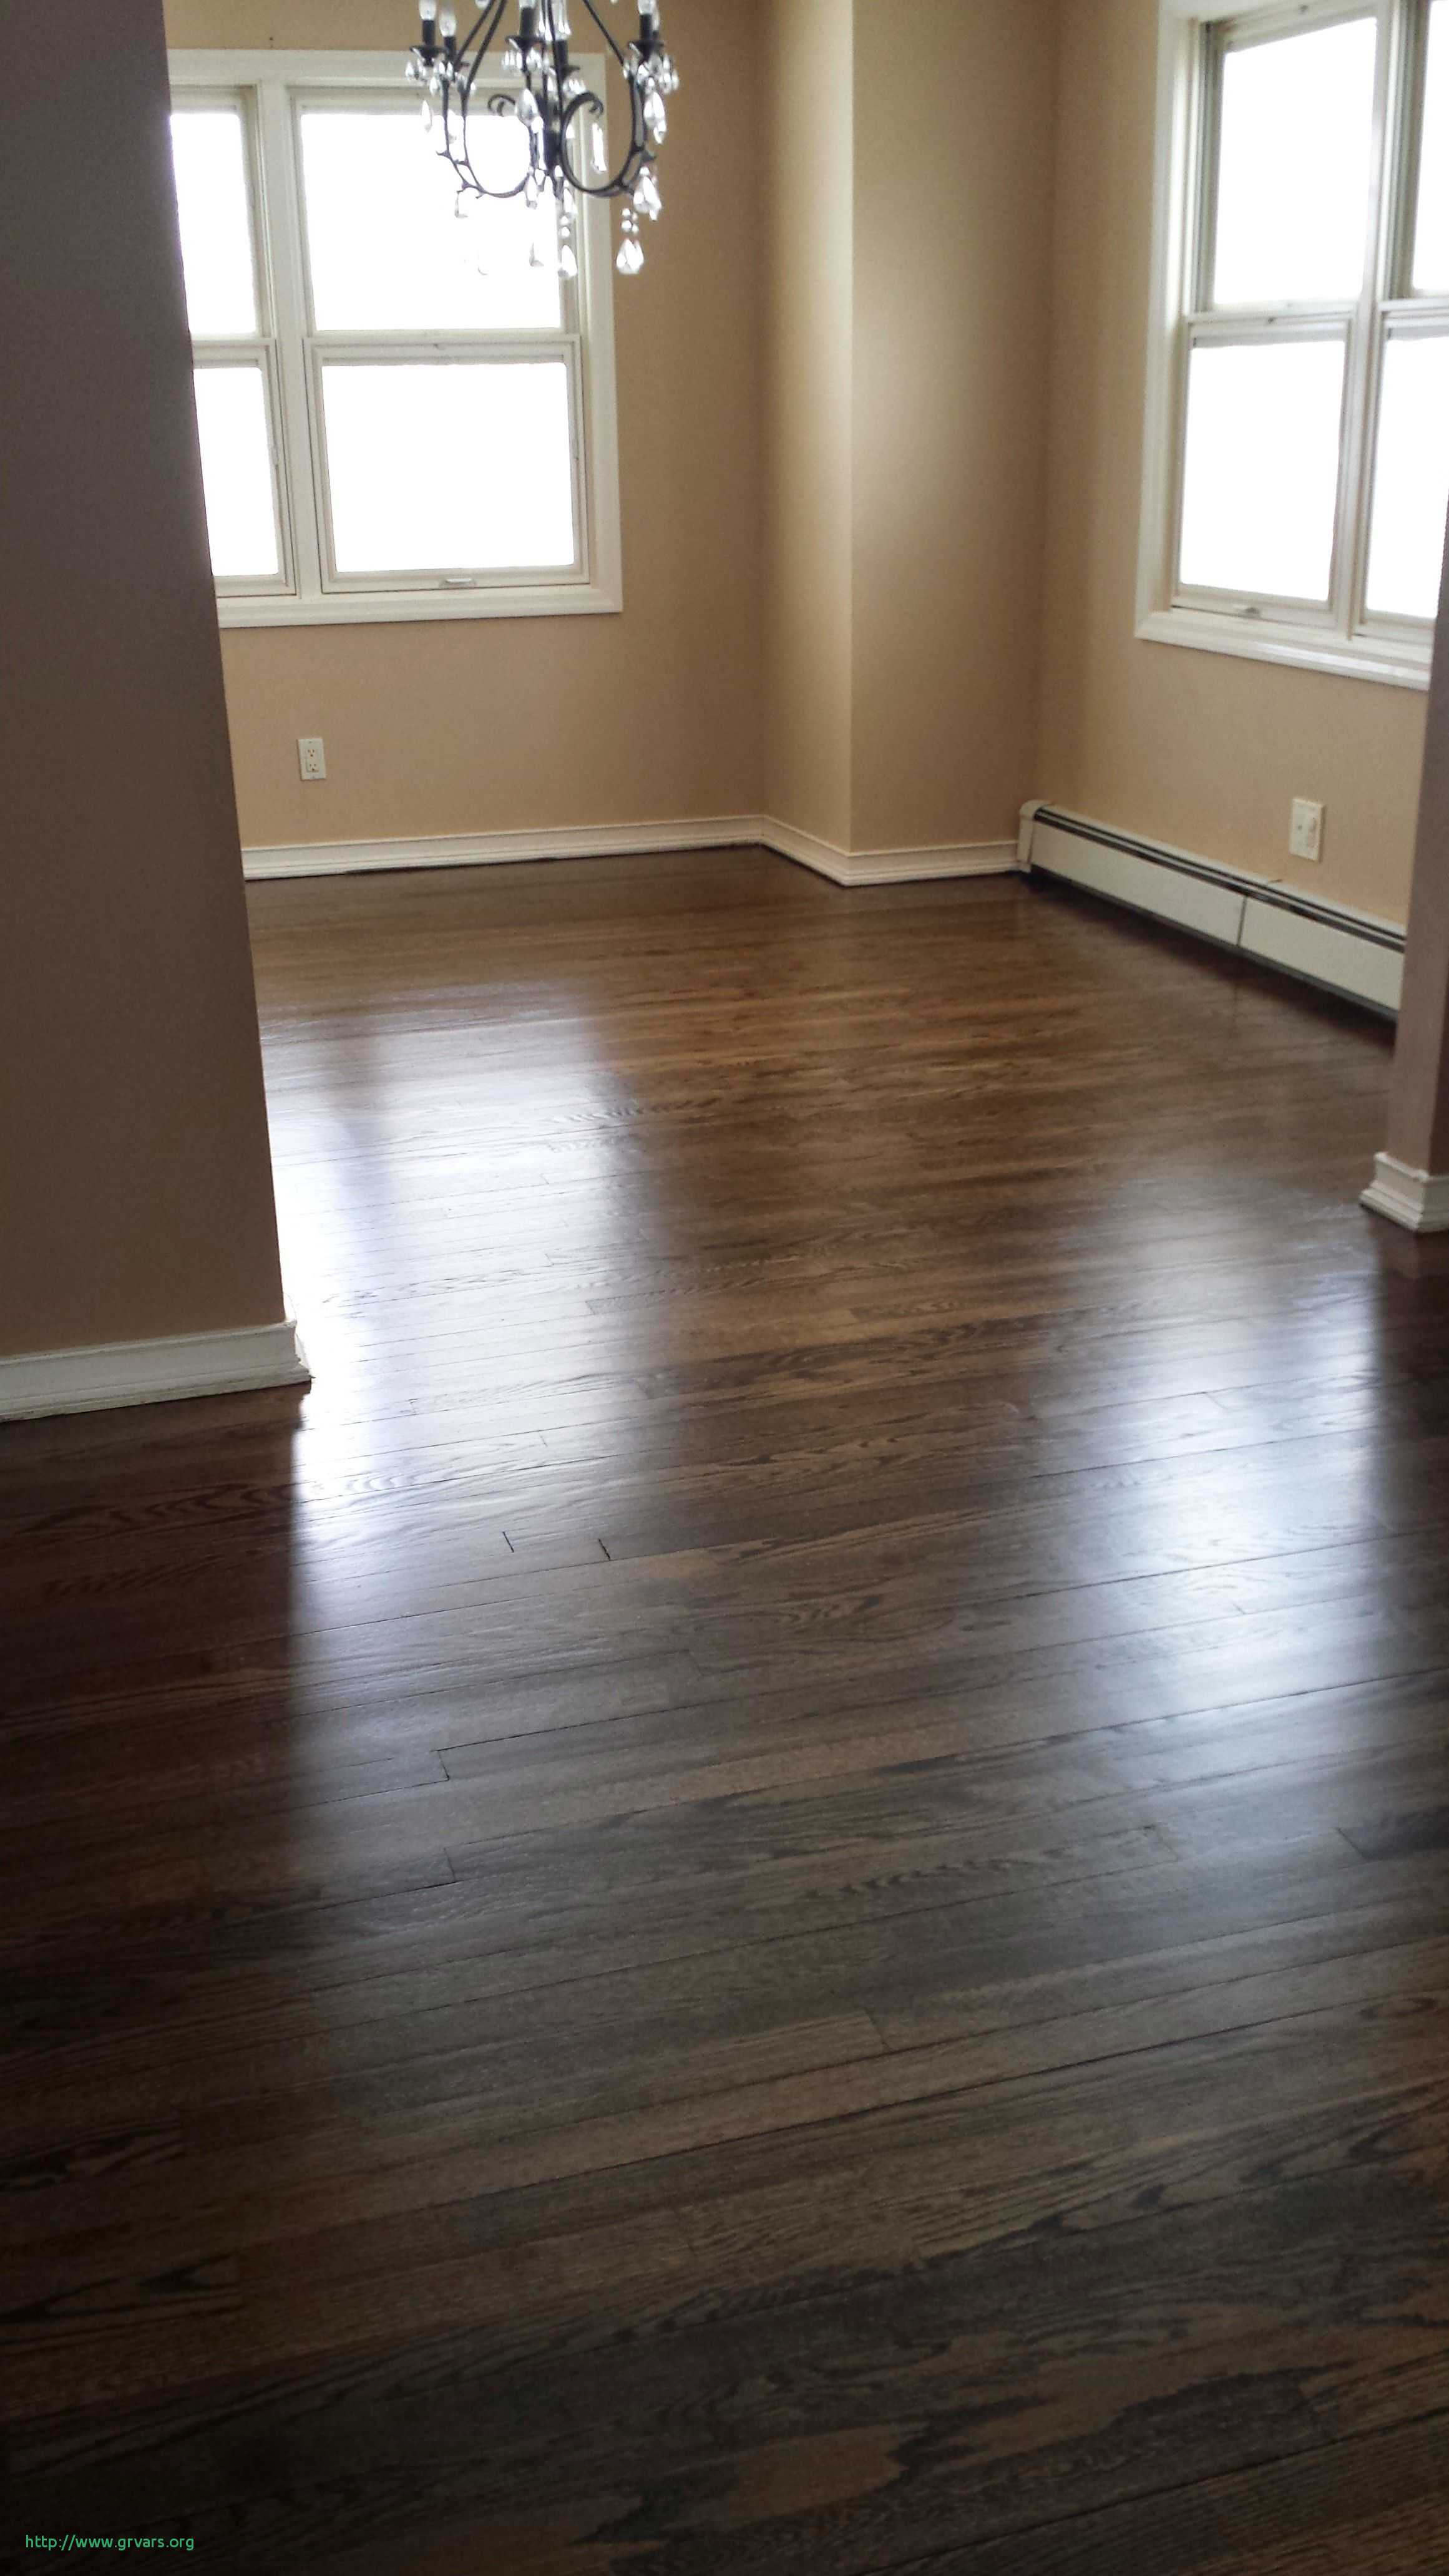 29 attractive Used Hardwood Floor Nailers for Sale 2024 free download used hardwood floor nailers for sale of 25 nouveau hardwood floor buffers for home use ideas blog intended for interior amusing refinishingod floors diy network refinish parquet without sand